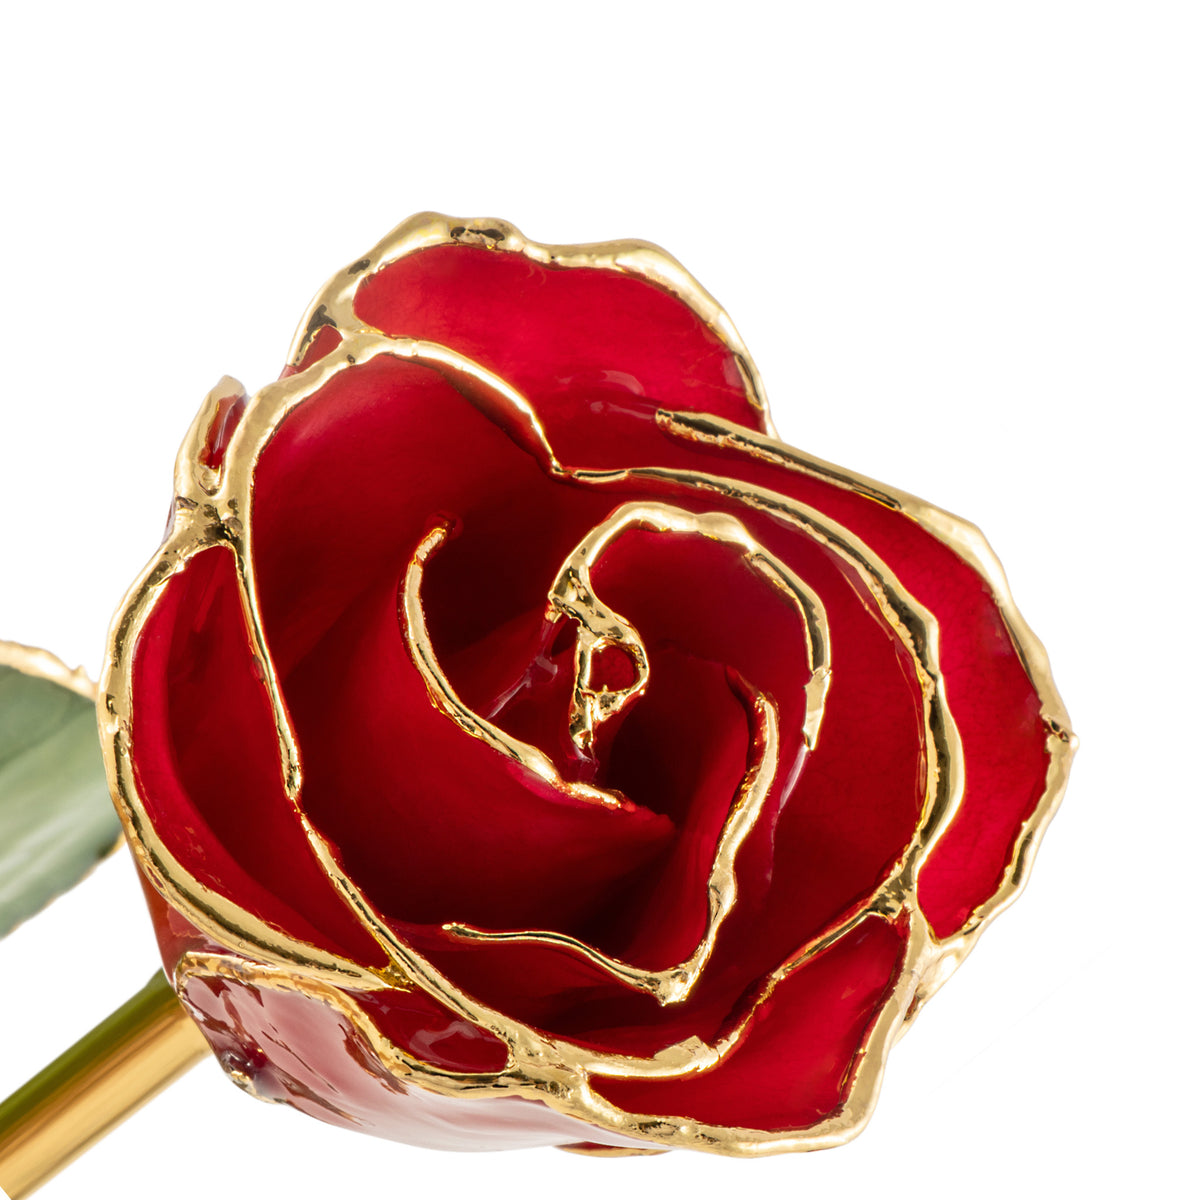 24K Gold Trimmed Forever Rose with Red Petals. View of Stem, Leaves, and Rose Petals and Showing Detail of Gold Trim oblique view looking down into bloom